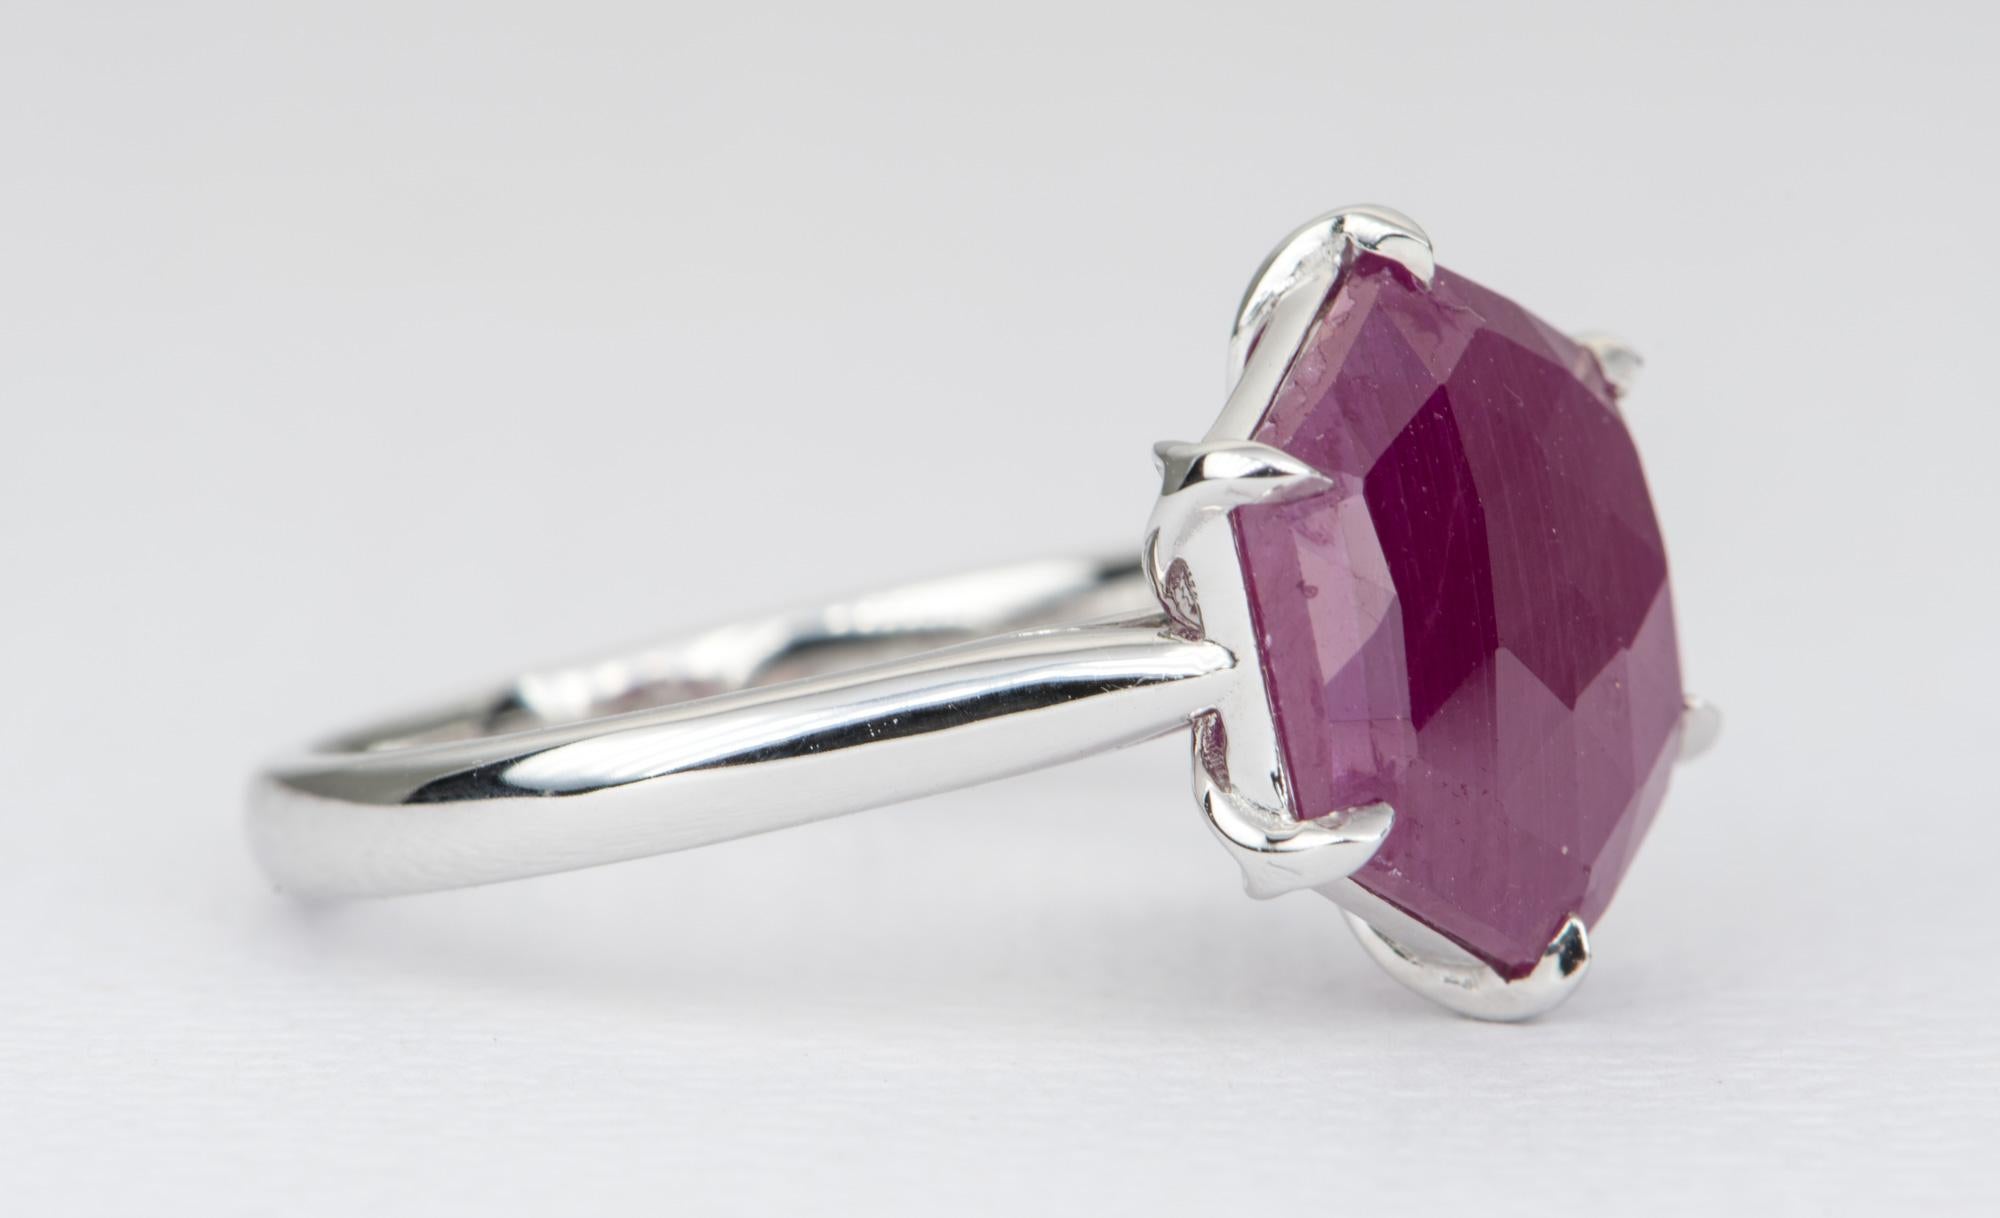 ♥  A stunning ring featuring a hexagon-shaped rose cut ruby in a tulip-like 6-prong setting
♥  Securely set on 14K white gold
♥  The overall setting measures 11.25mm in width, 13.8mm in length, and sits 5.6mm tall from the finger

♥  Ring size: US 7